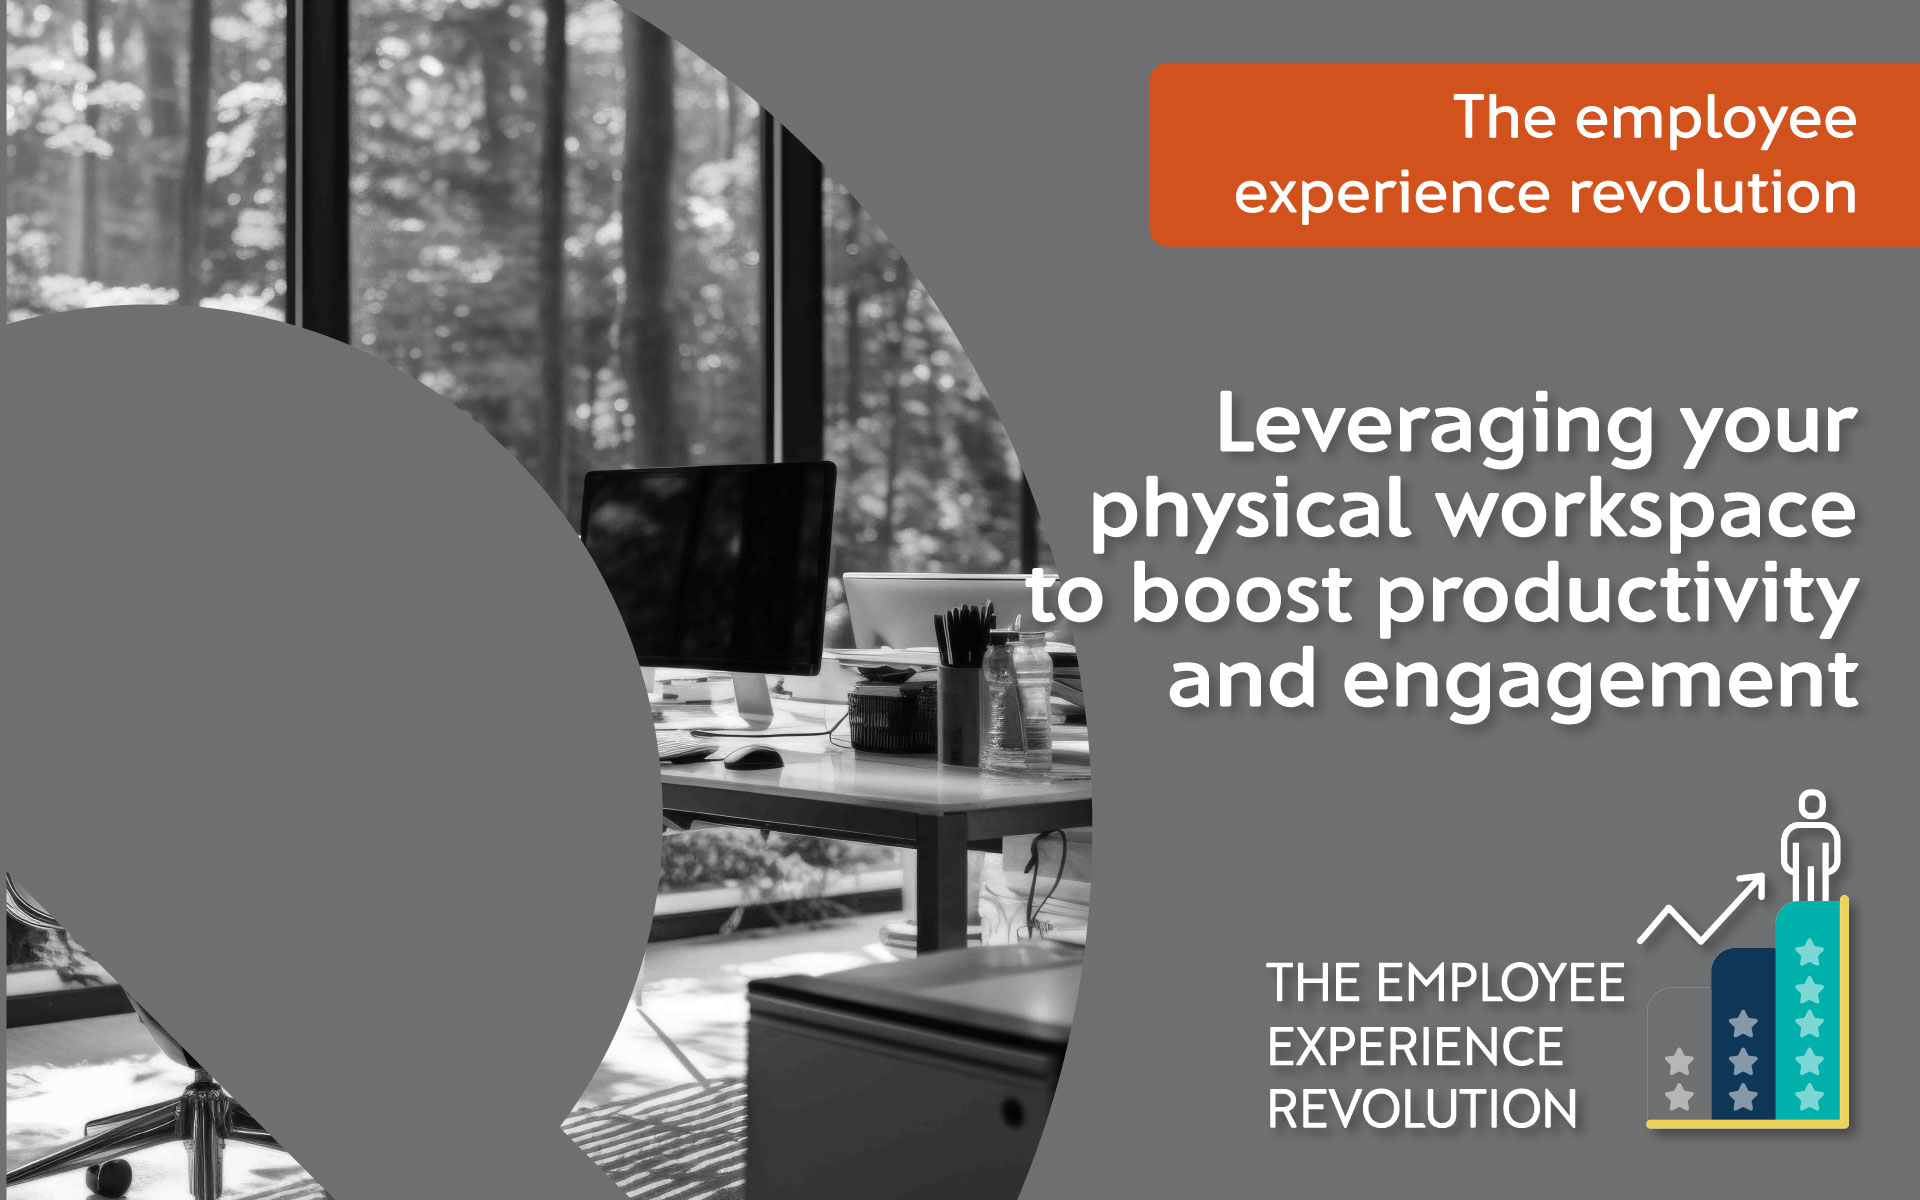 EX revolution - leveraging your physical workspace